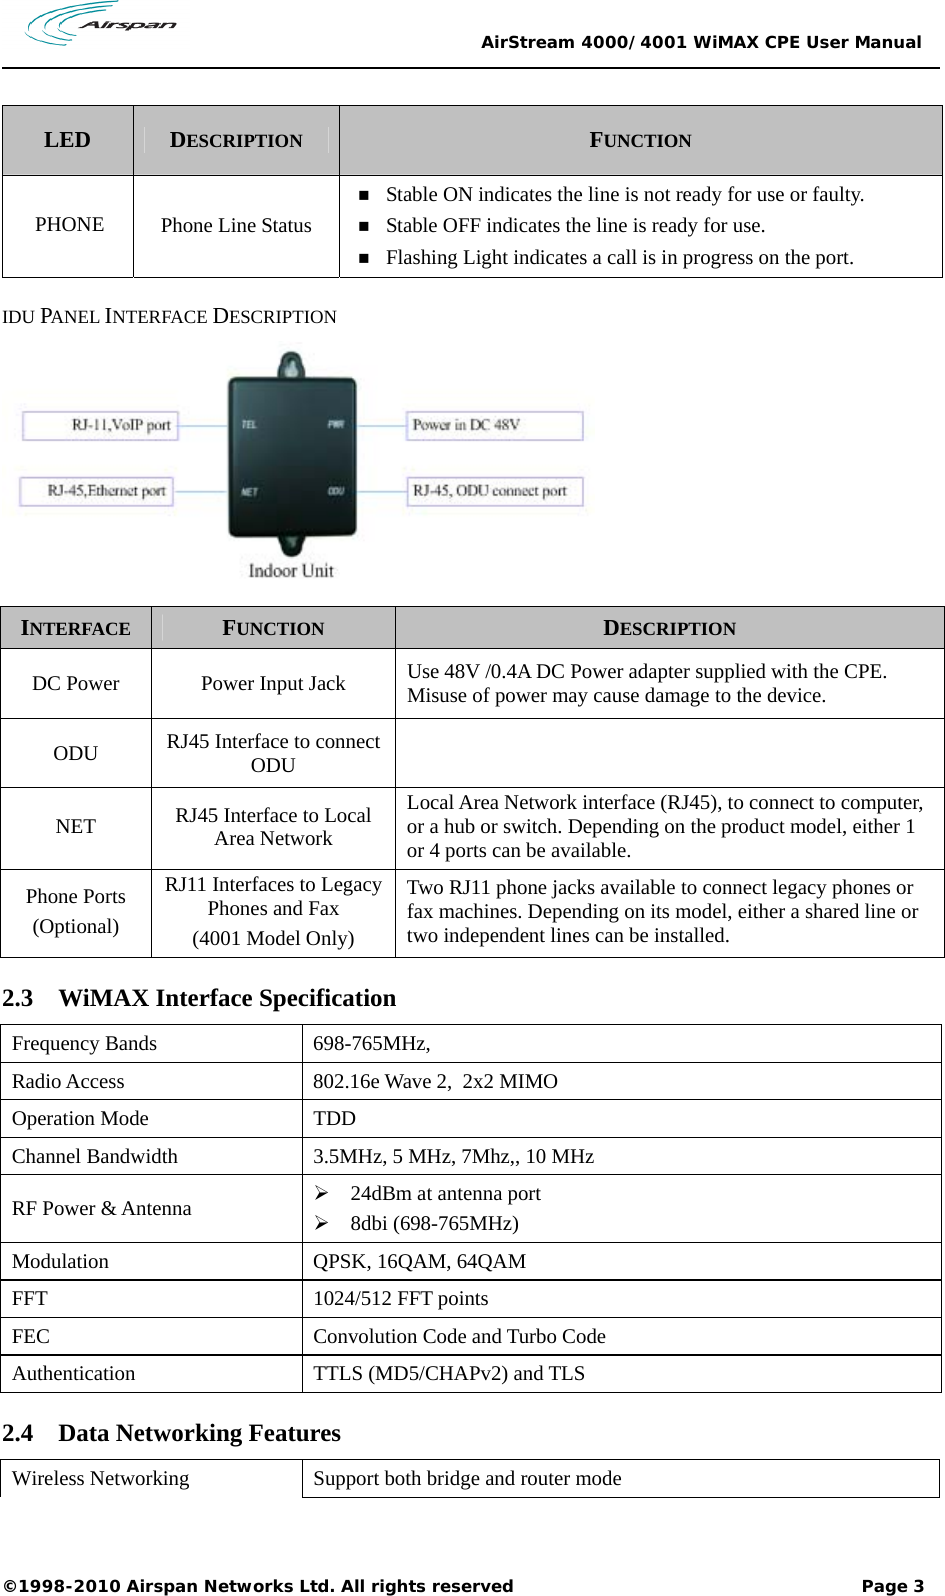                                                 AirStream 4000/4001 WiMAX CPE User Manual ©1998-2010 Airspan Networks Ltd. All rights reserved                                                             Page 3  LED  DESCRIPTION  FUNCTION PHONE  Phone Line Status  Stable ON indicates the line is not ready for use or faulty.   Stable OFF indicates the line is ready for use.   Flashing Light indicates a call is in progress on the port.  IDU PANEL INTERFACE DESCRIPTION   INTERFACE  FUNCTION  DESCRIPTION DC Power  Power Input Jack  Use 48V /0.4A DC Power adapter supplied with the CPE. Misuse of power may cause damage to the device. ODU  RJ45 Interface to connect ODU   NET  RJ45 Interface to Local Area Network Local Area Network interface (RJ45), to connect to computer, or a hub or switch. Depending on the product model, either 1 or 4 ports can be available. Phone Ports (Optional) RJ11 Interfaces to Legacy Phones and Fax (4001 Model Only) Two RJ11 phone jacks available to connect legacy phones or fax machines. Depending on its model, either a shared line or two independent lines can be installed.  2.3 WiMAX Interface Specification Frequency Bands    698-765MHz, Radio Access  802.16e Wave 2,  2x2 MIMO Operation Mode  TDD Channel Bandwidth  3.5MHz, 5 MHz, 7Mhz,, 10 MHz RF Power &amp; Antenna   24dBm at antenna port  8dbi (698-765MHz) Modulation  QPSK, 16QAM, 64QAM FFT 1024/512 FFT points FEC  Convolution Code and Turbo Code Authentication TTLS (MD5/CHAPv2) and TLS 2.4 Data Networking Features Wireless Networking  Support both bridge and router mode 